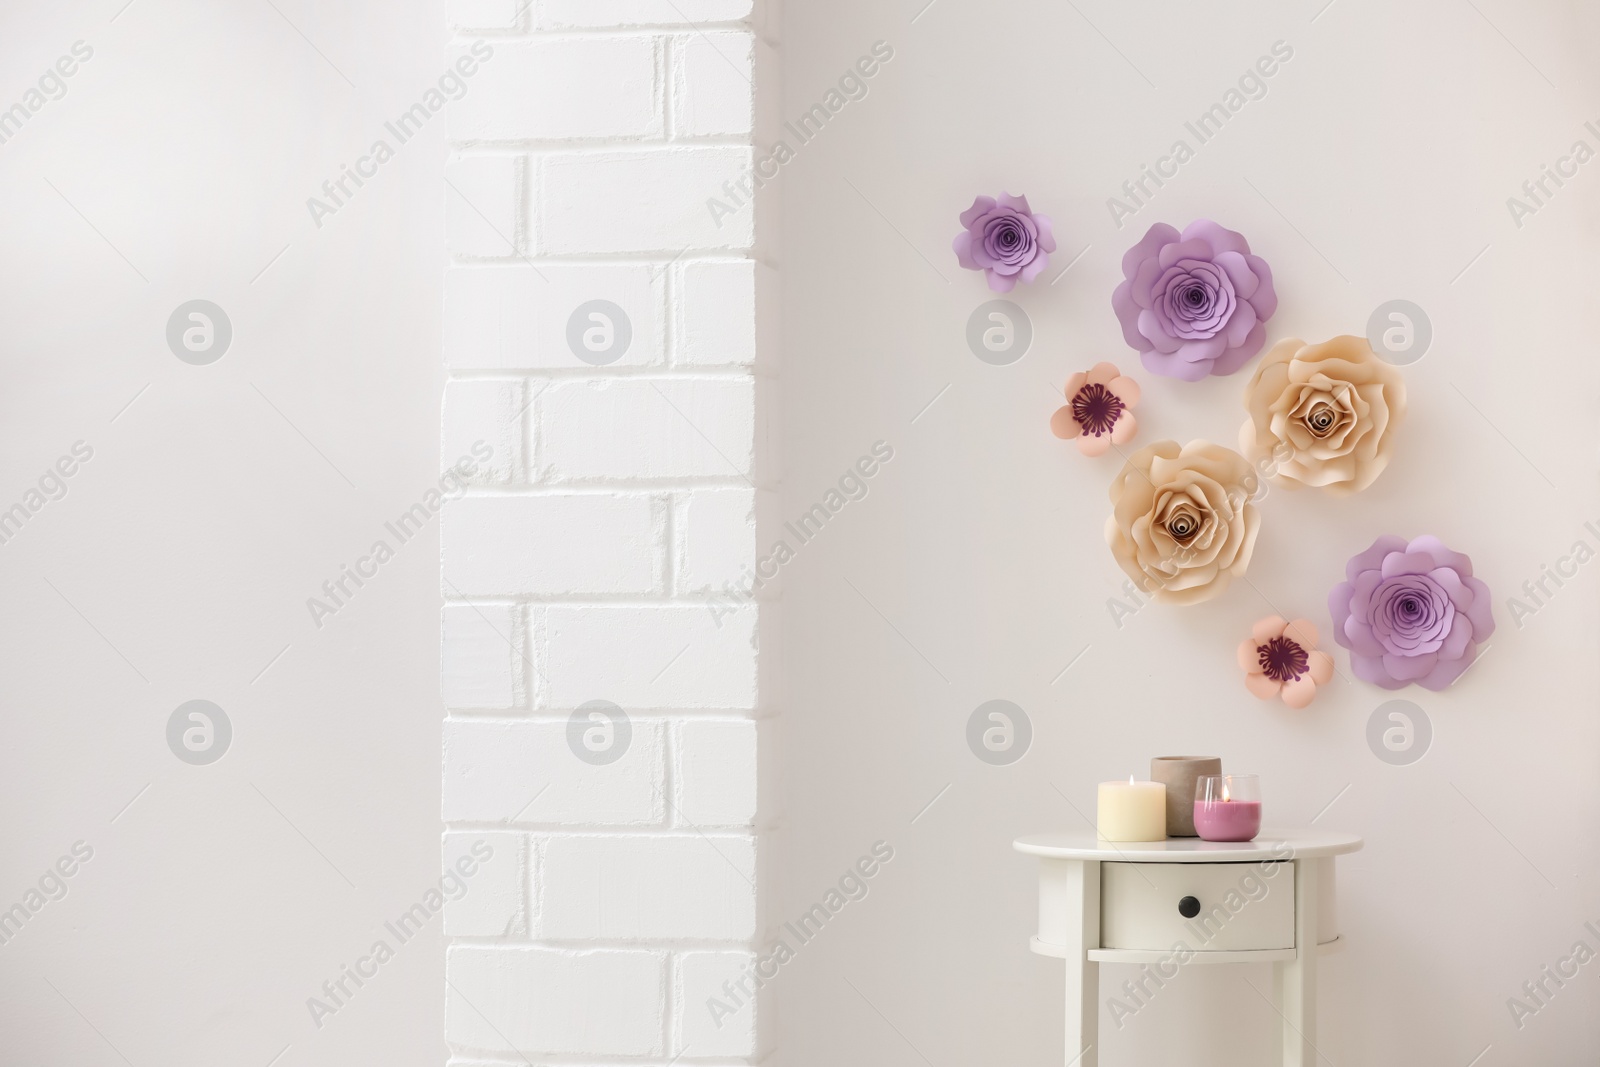 Photo of Stylish room interior with floral decor, table and candles, space for text